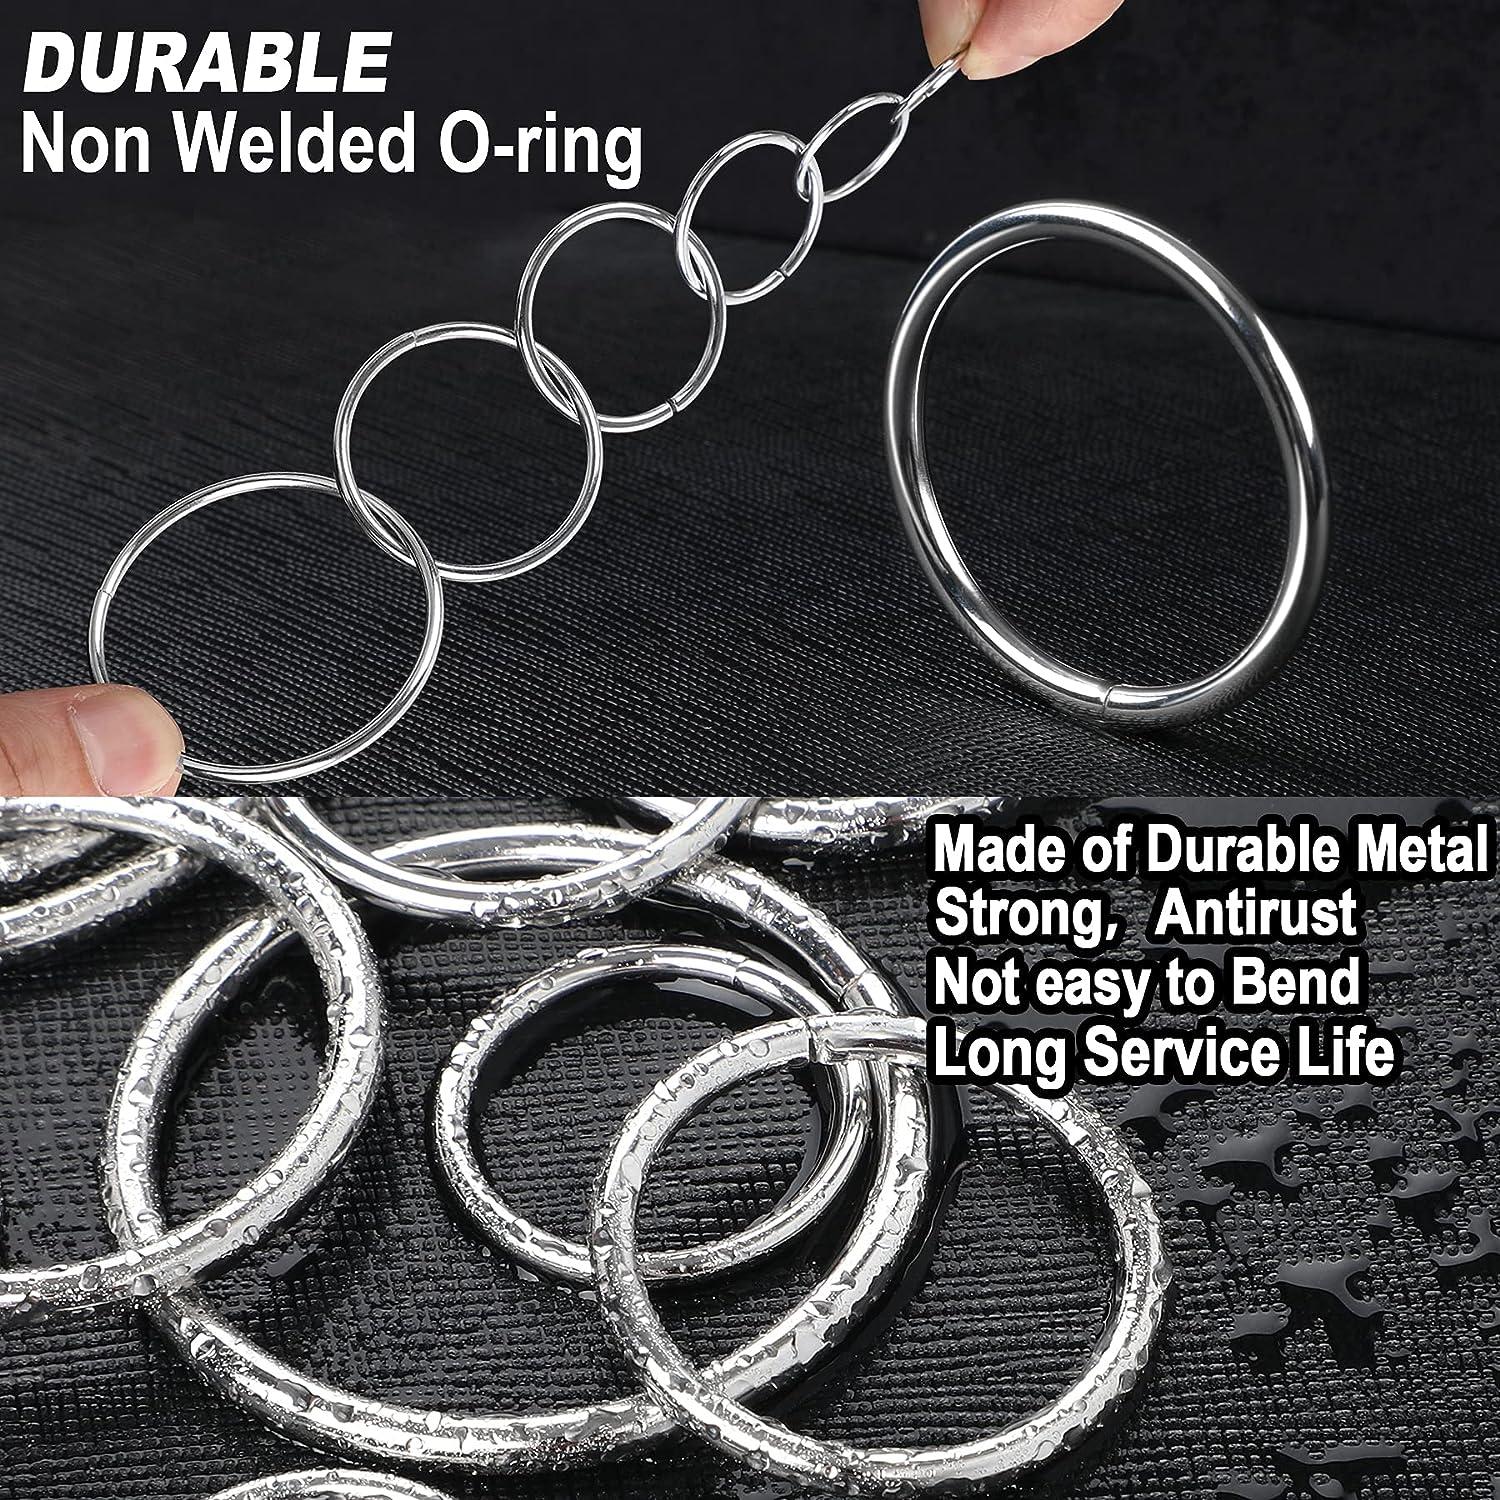  90Pcs 6 Sizes Silver Metal O Rings Multi-Purpose Heavy Duty  Round Ring for Hardware Bags Belts Dog Leashes Hanging Basket DIY Craft  Supplies, 15mm, 20mm, 25mm, 32mm, 38mm, 50mm : Arts